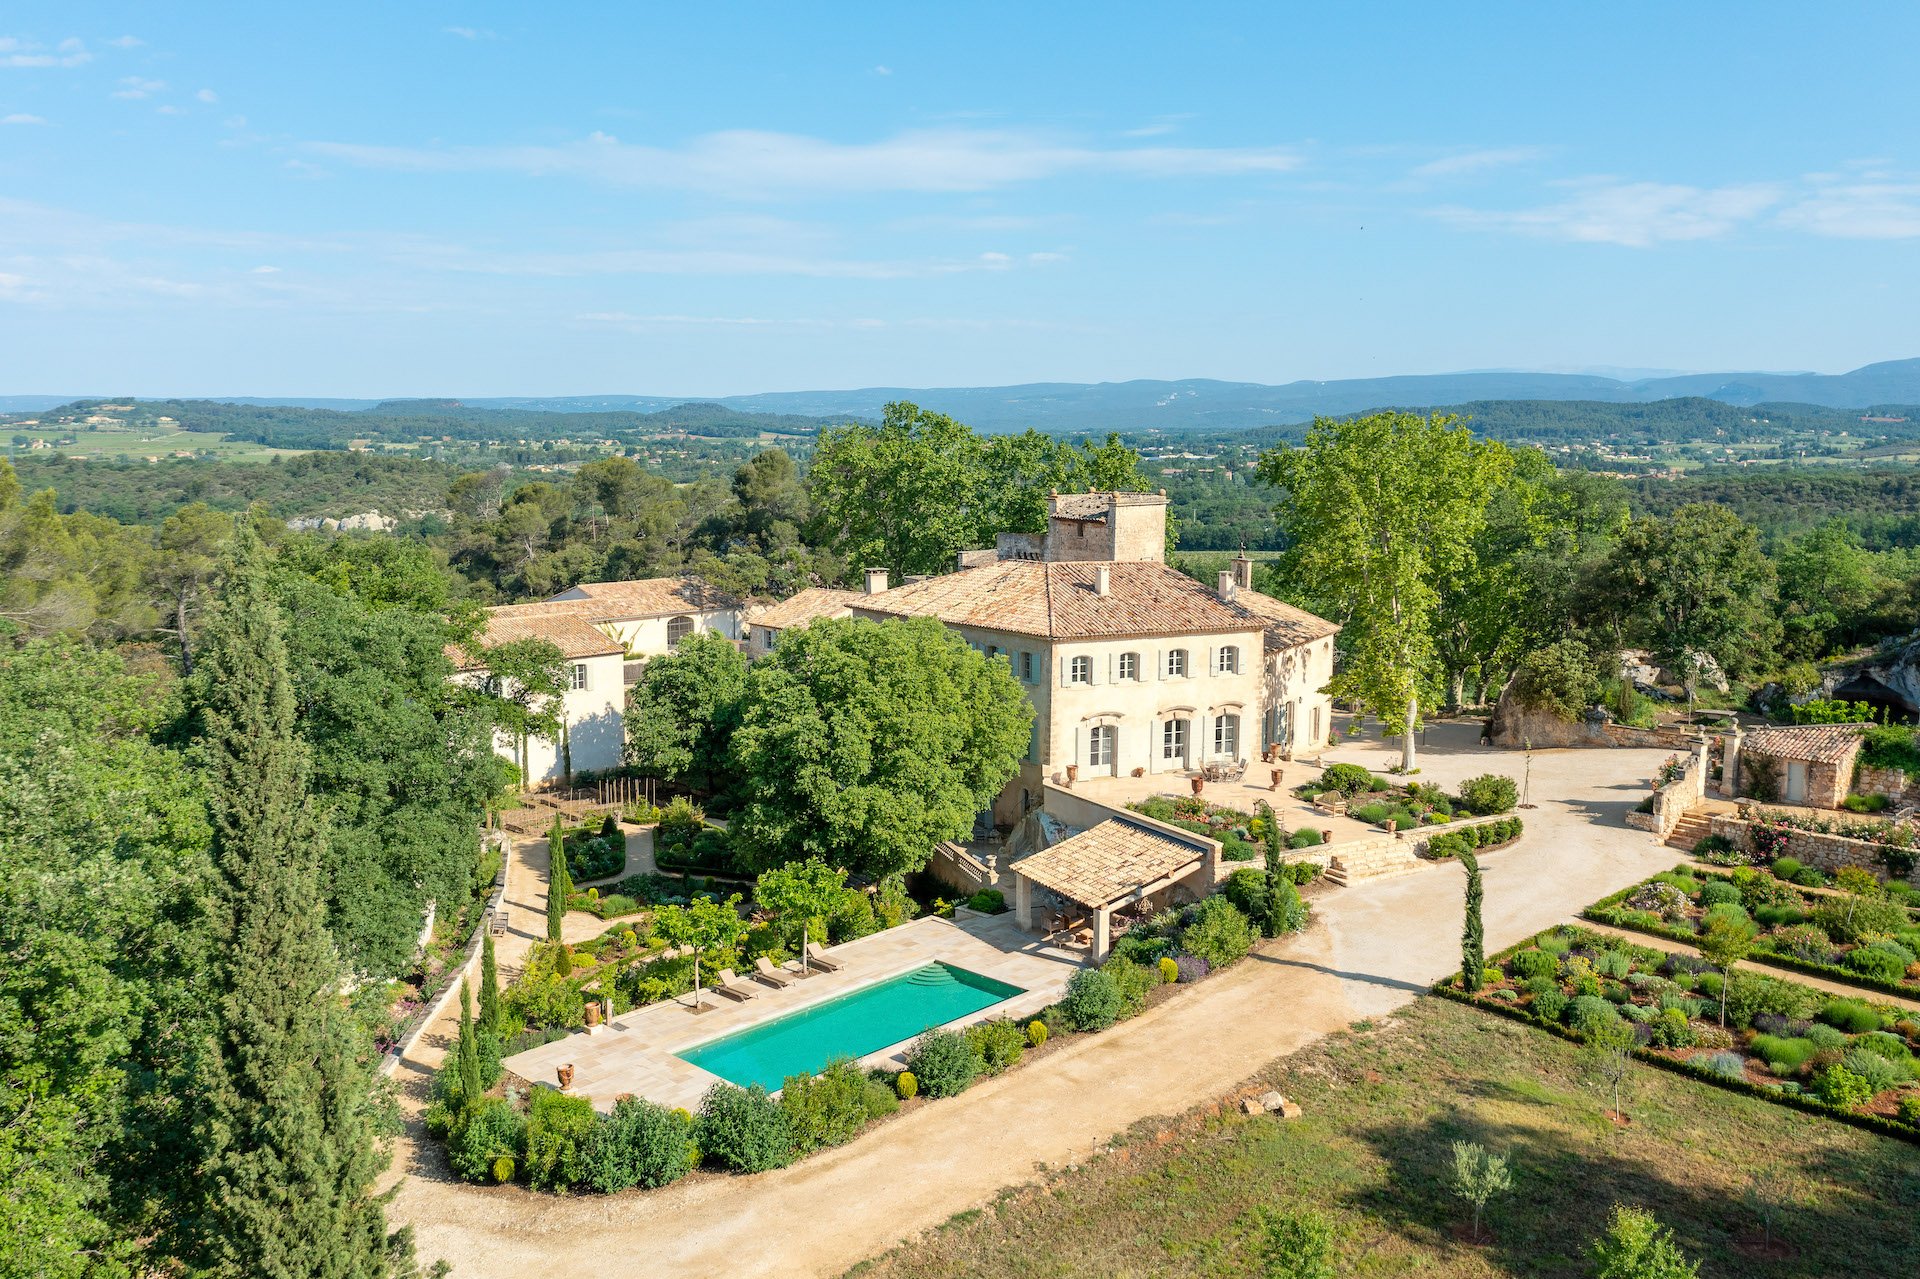 Exceptional wine château in Bonnieux in the heart of the Luberon